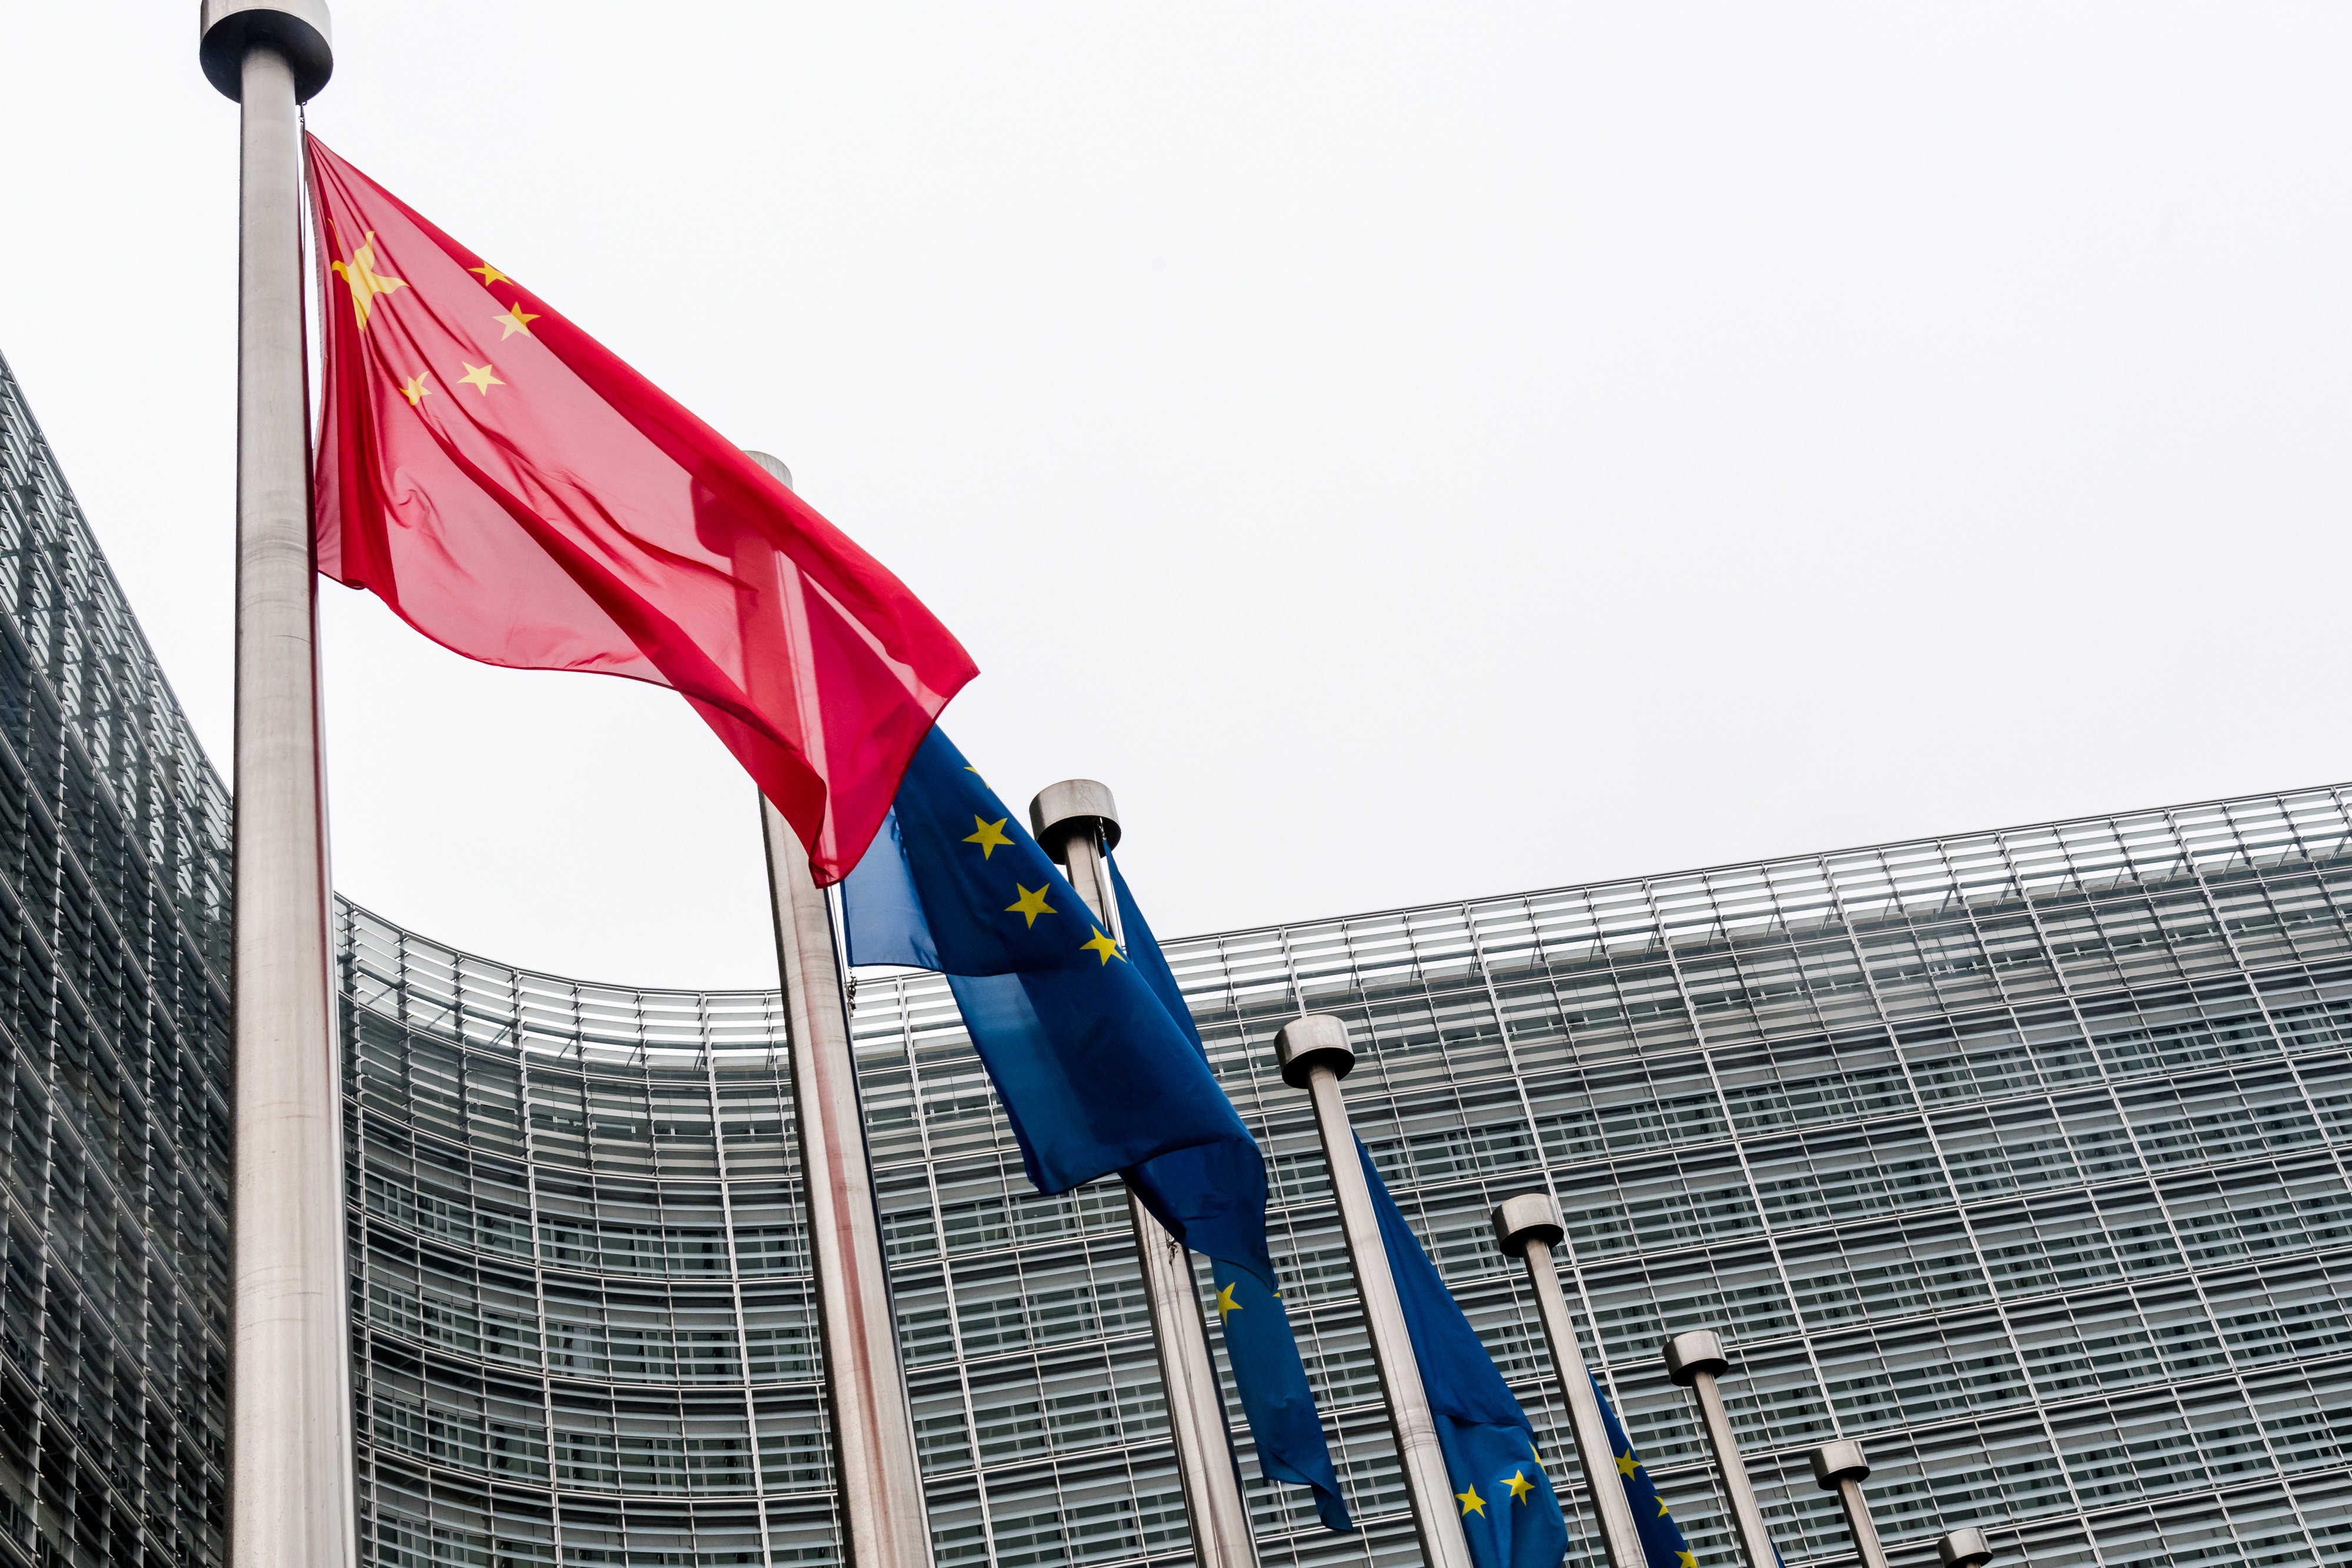 The EU’s de-risking policy has caused concern among Chinese officials and businesses. Photo: Bloomberg